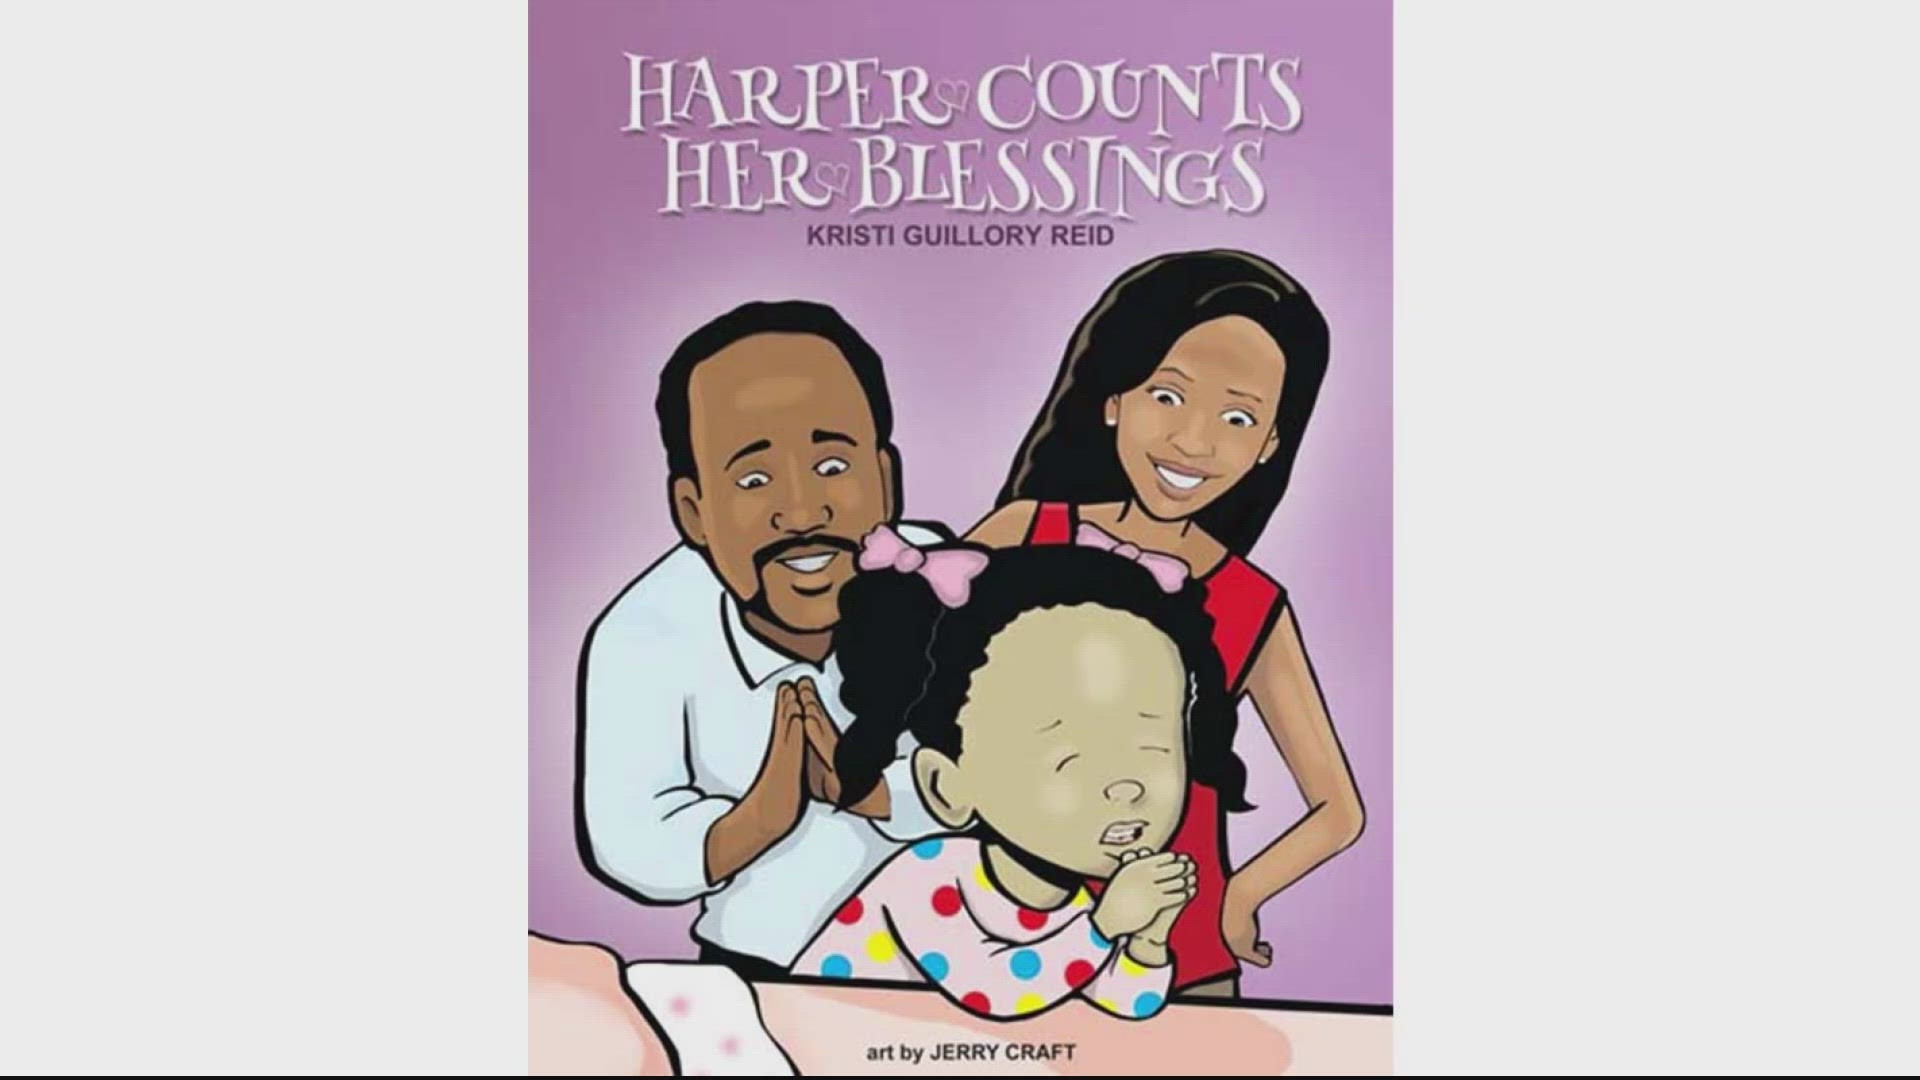 The Alexandria mother's book, "Harper Counts Her Blessings," spotlights an emotion we sometimes take for granted.